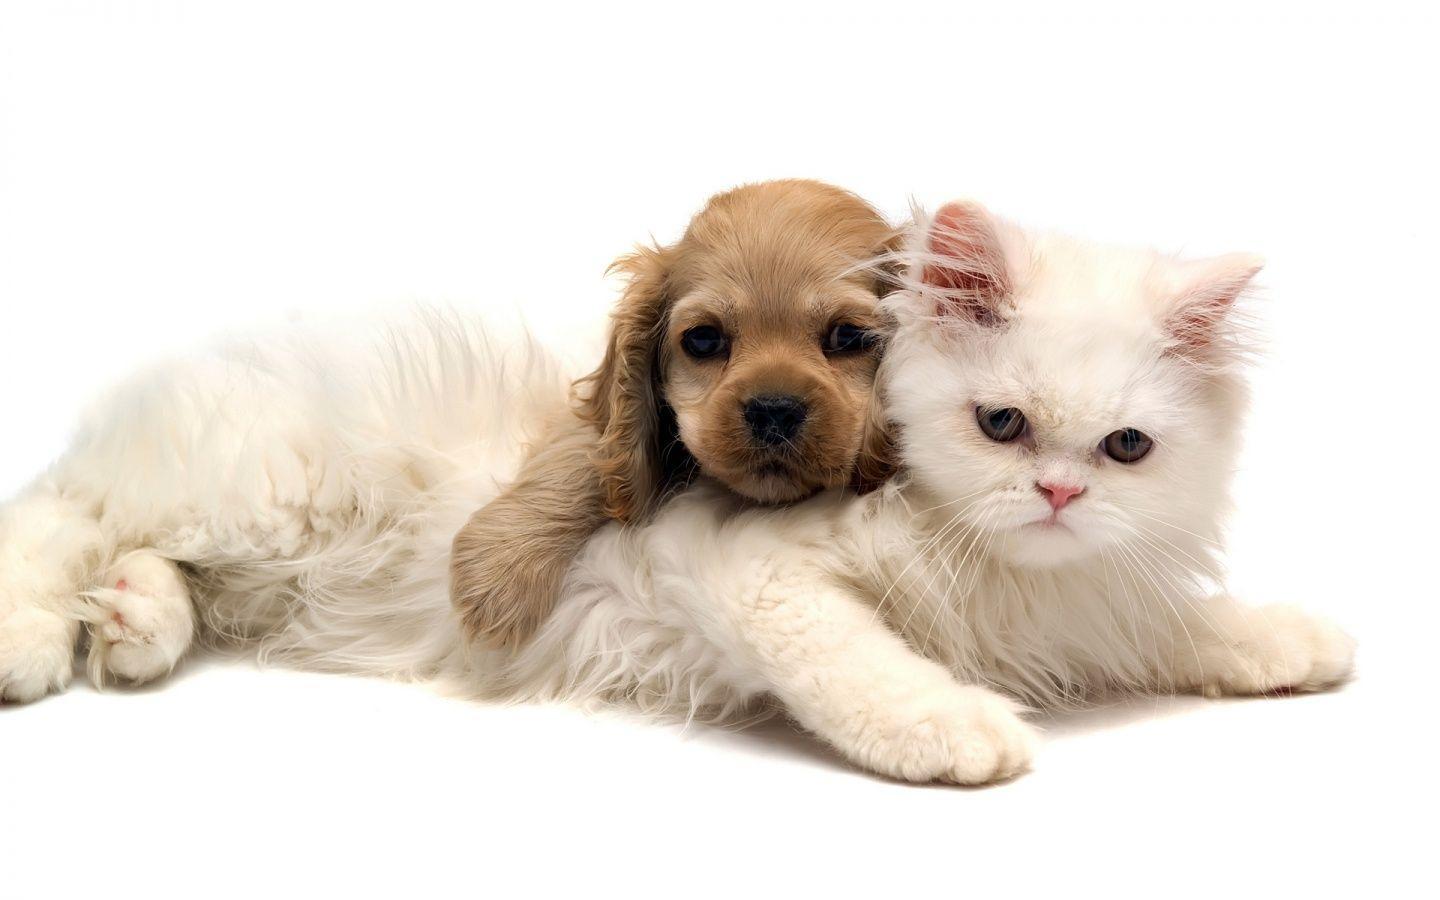 Wallpapers For > Cute Dog And Cat Wallpapers